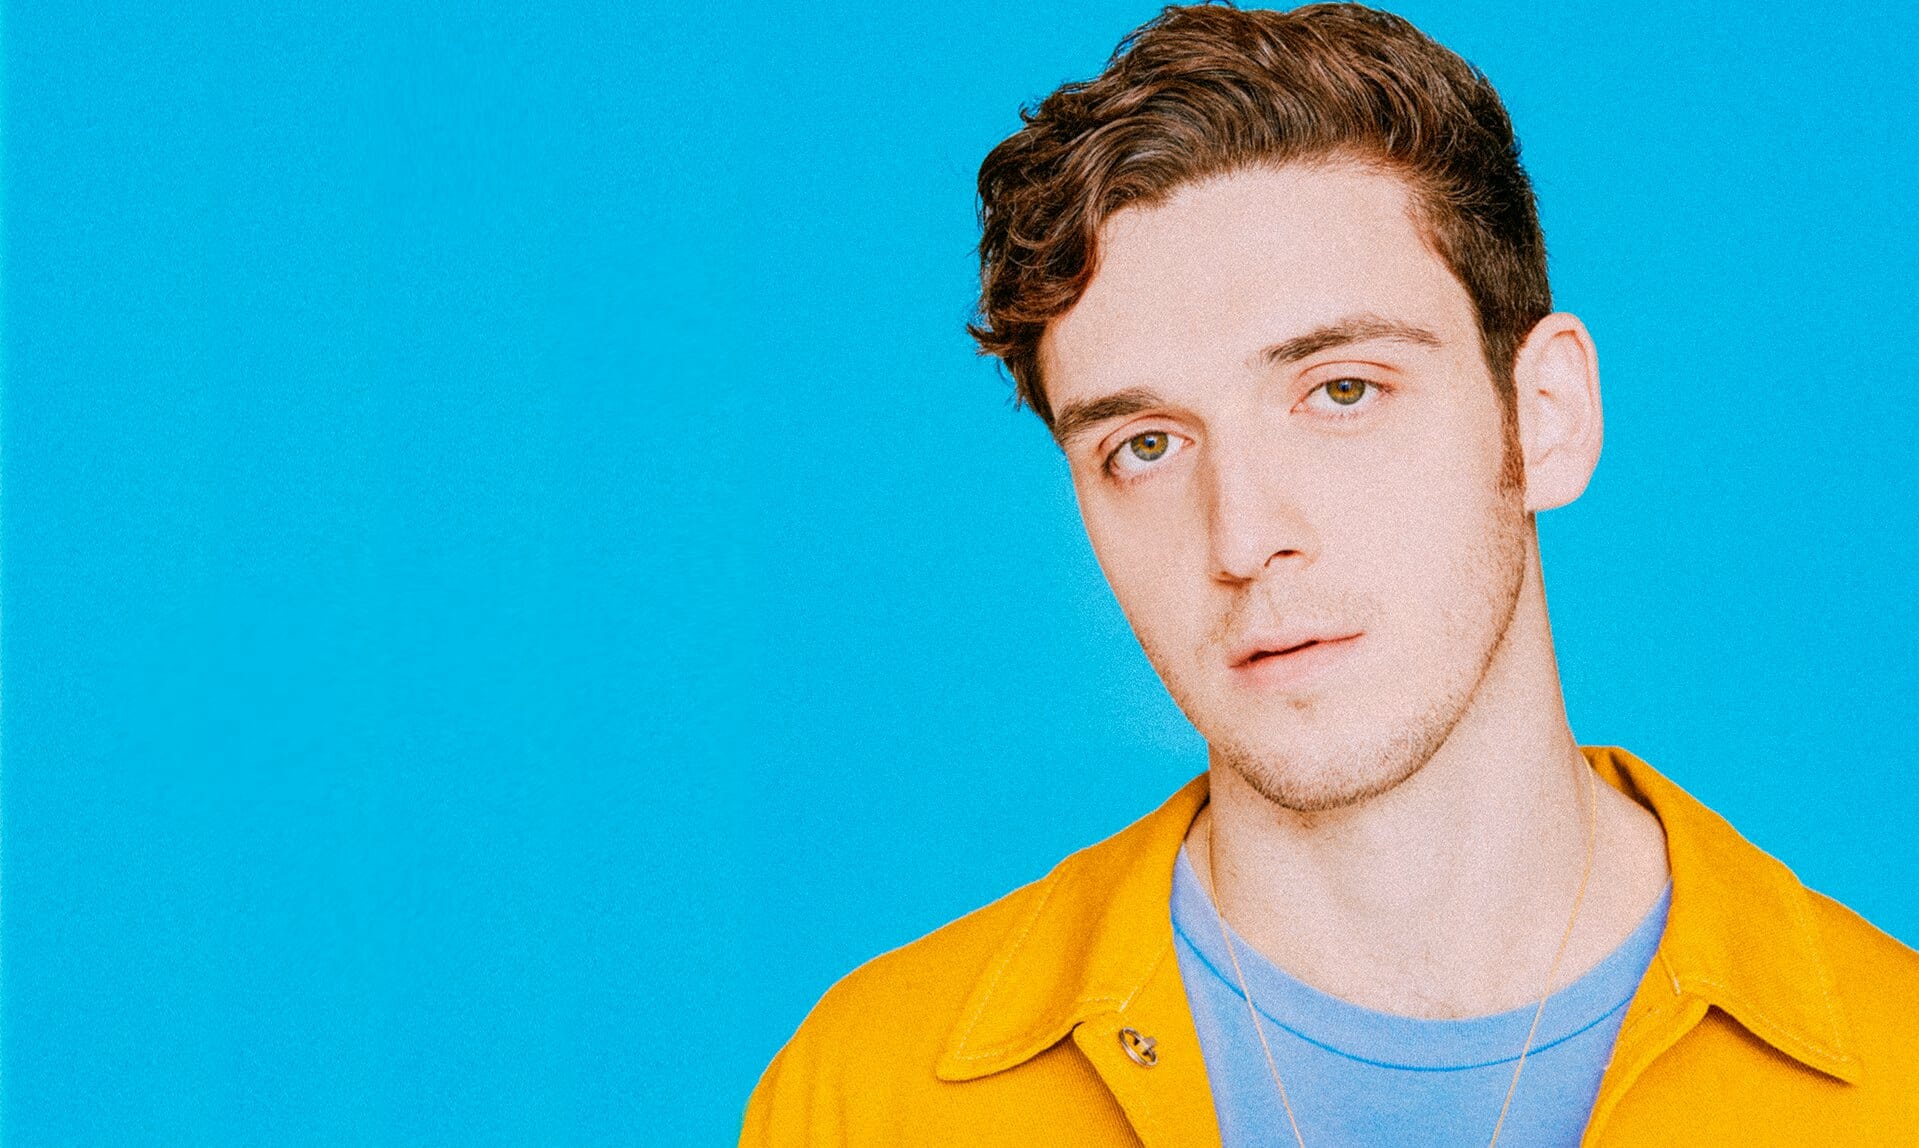 Lauv and Troye Sivan are “so tired of love songs” in new Valentine’s Day video